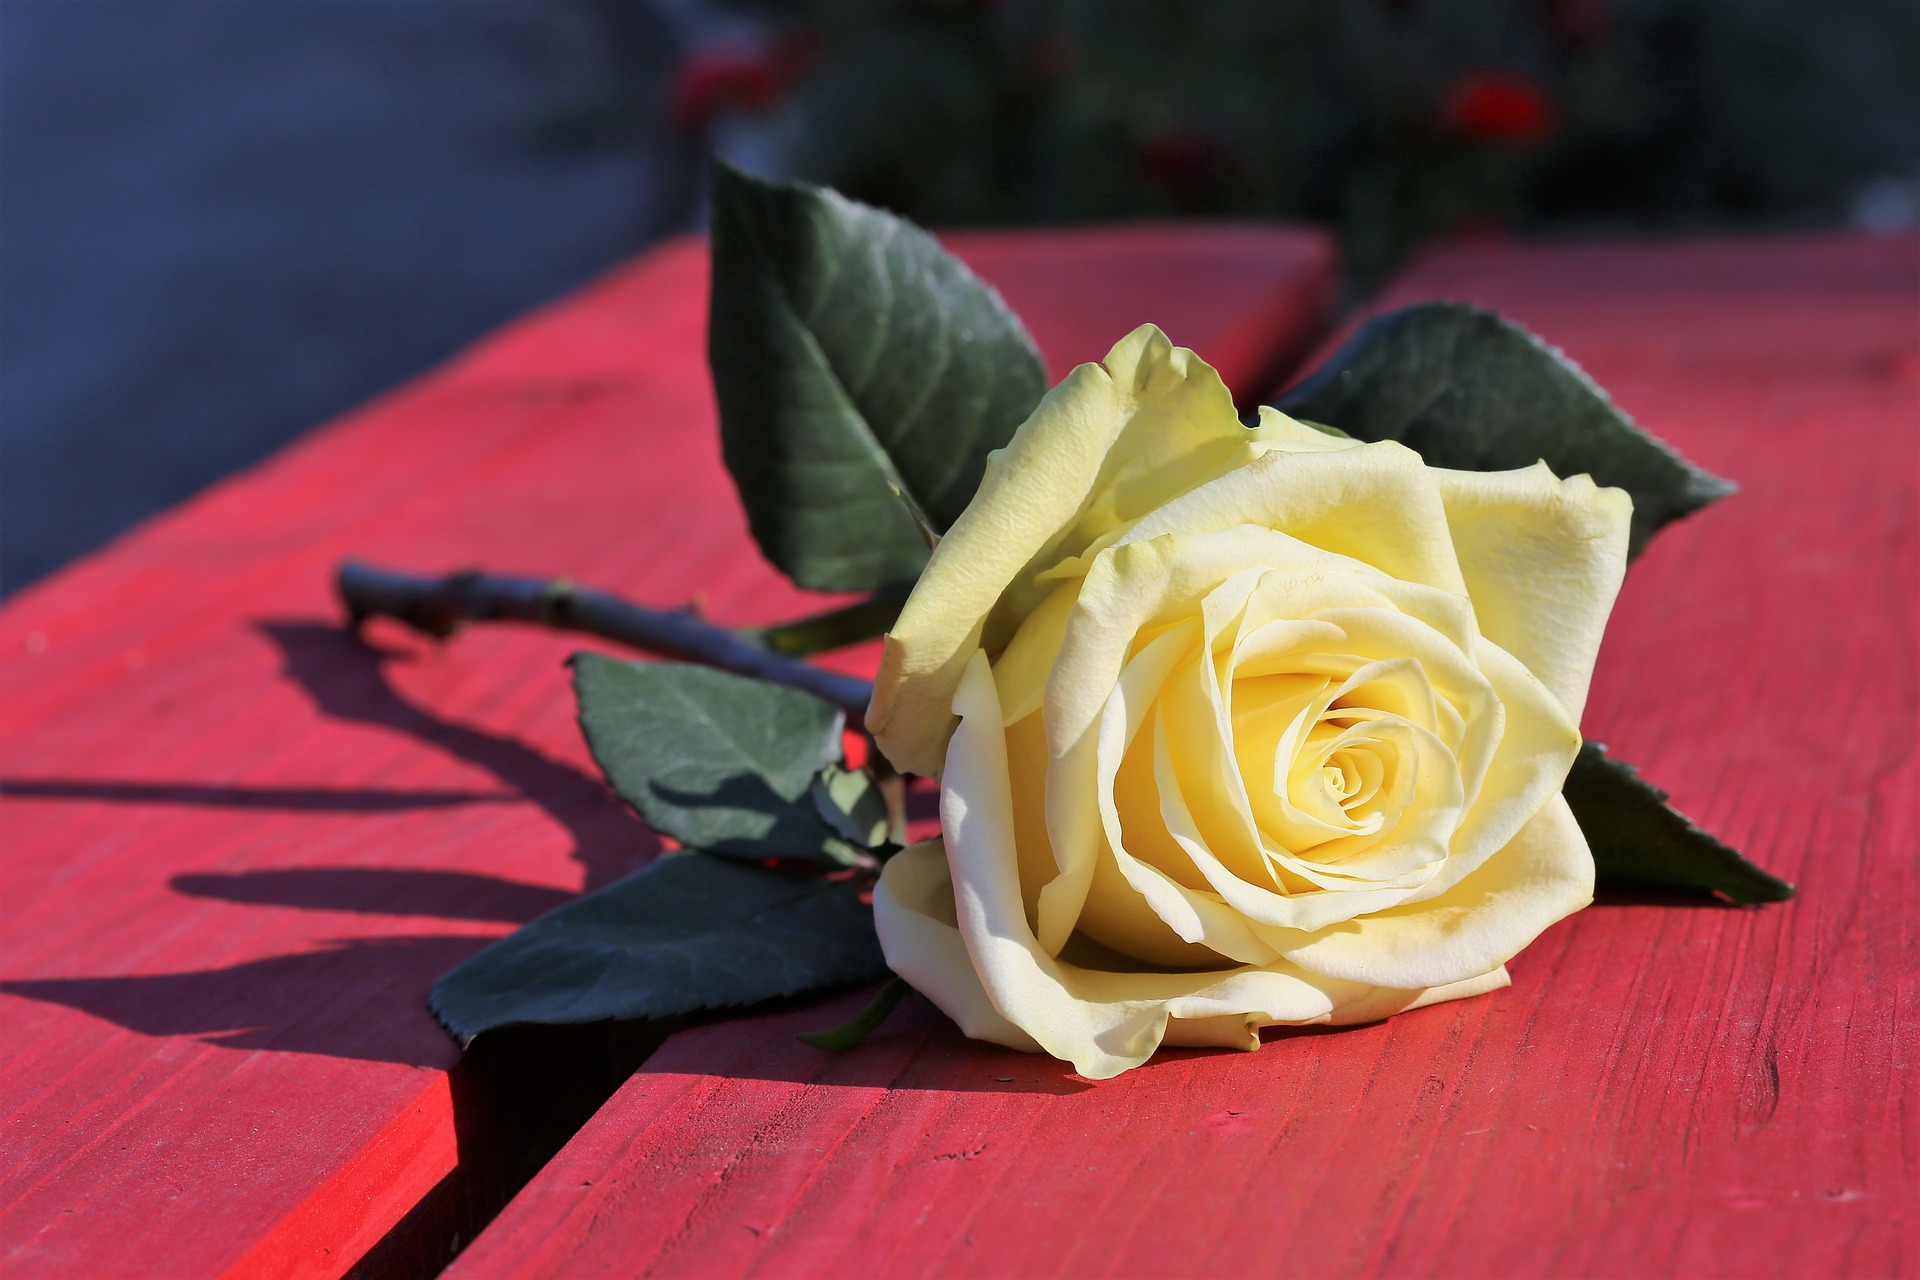 yellow-rose-on-red-bench-3624504_1920